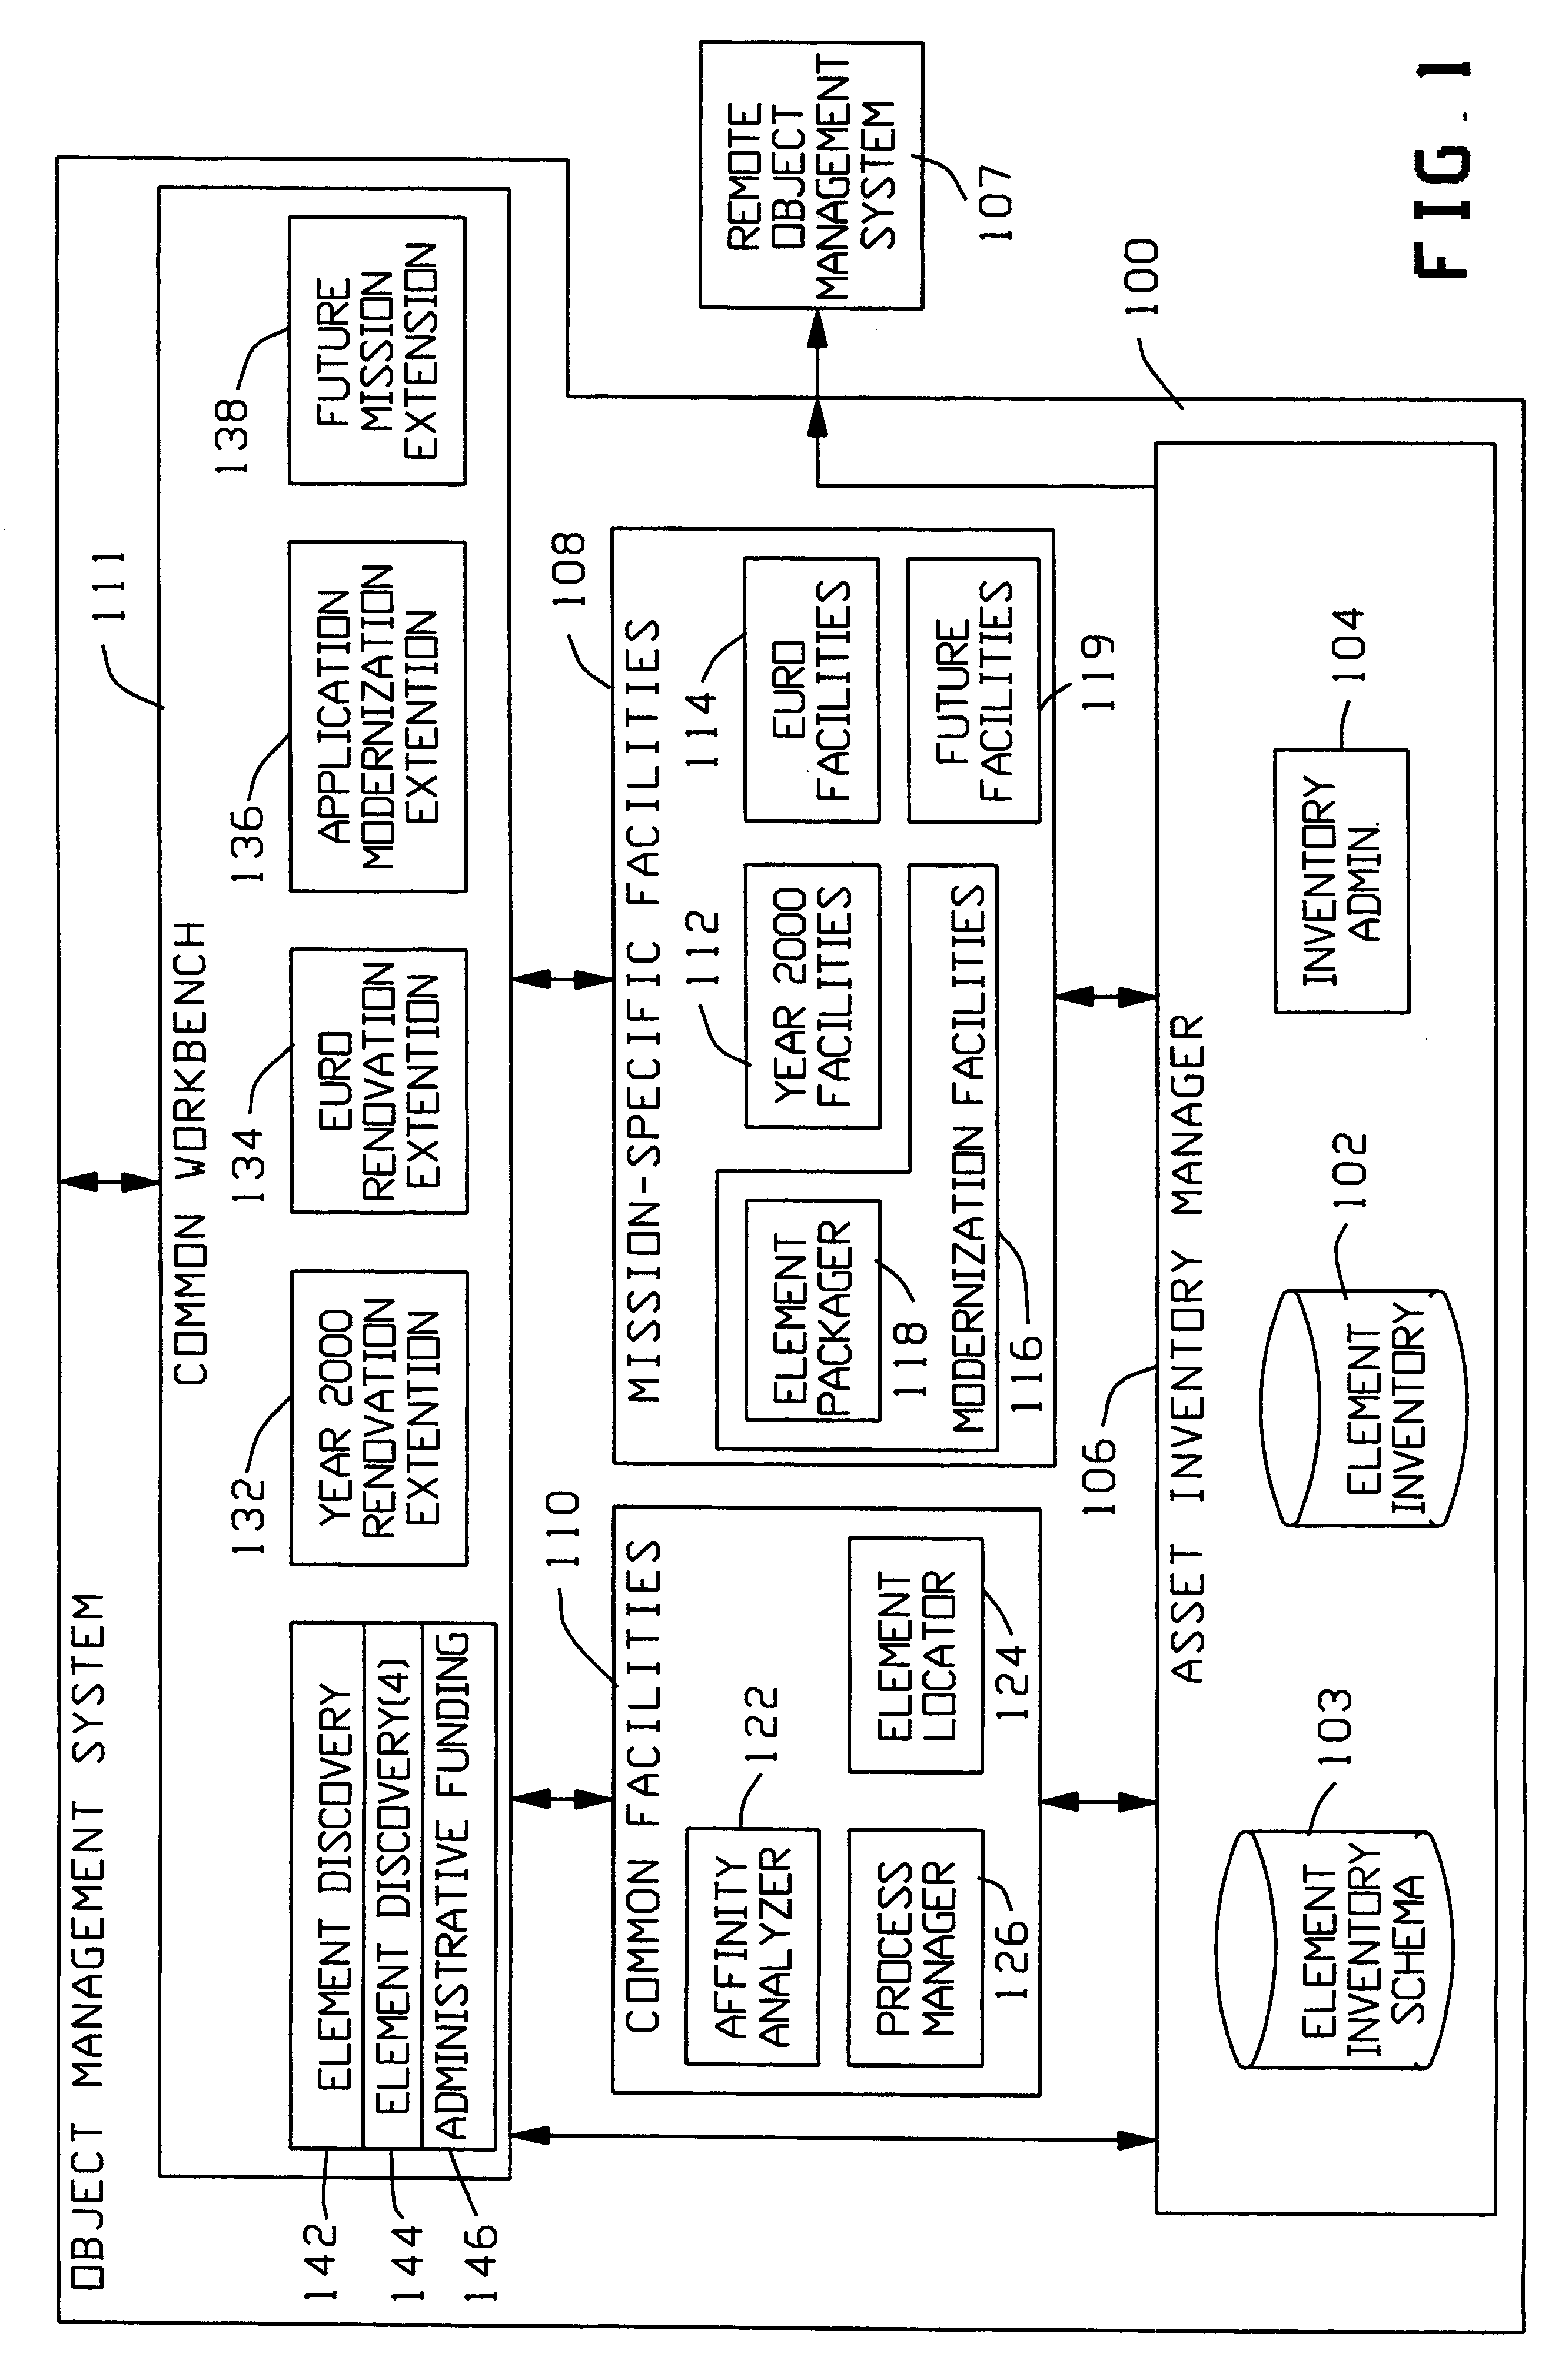 Object management system supporting the use of application domain knowledge mapped to technology domain knowledge